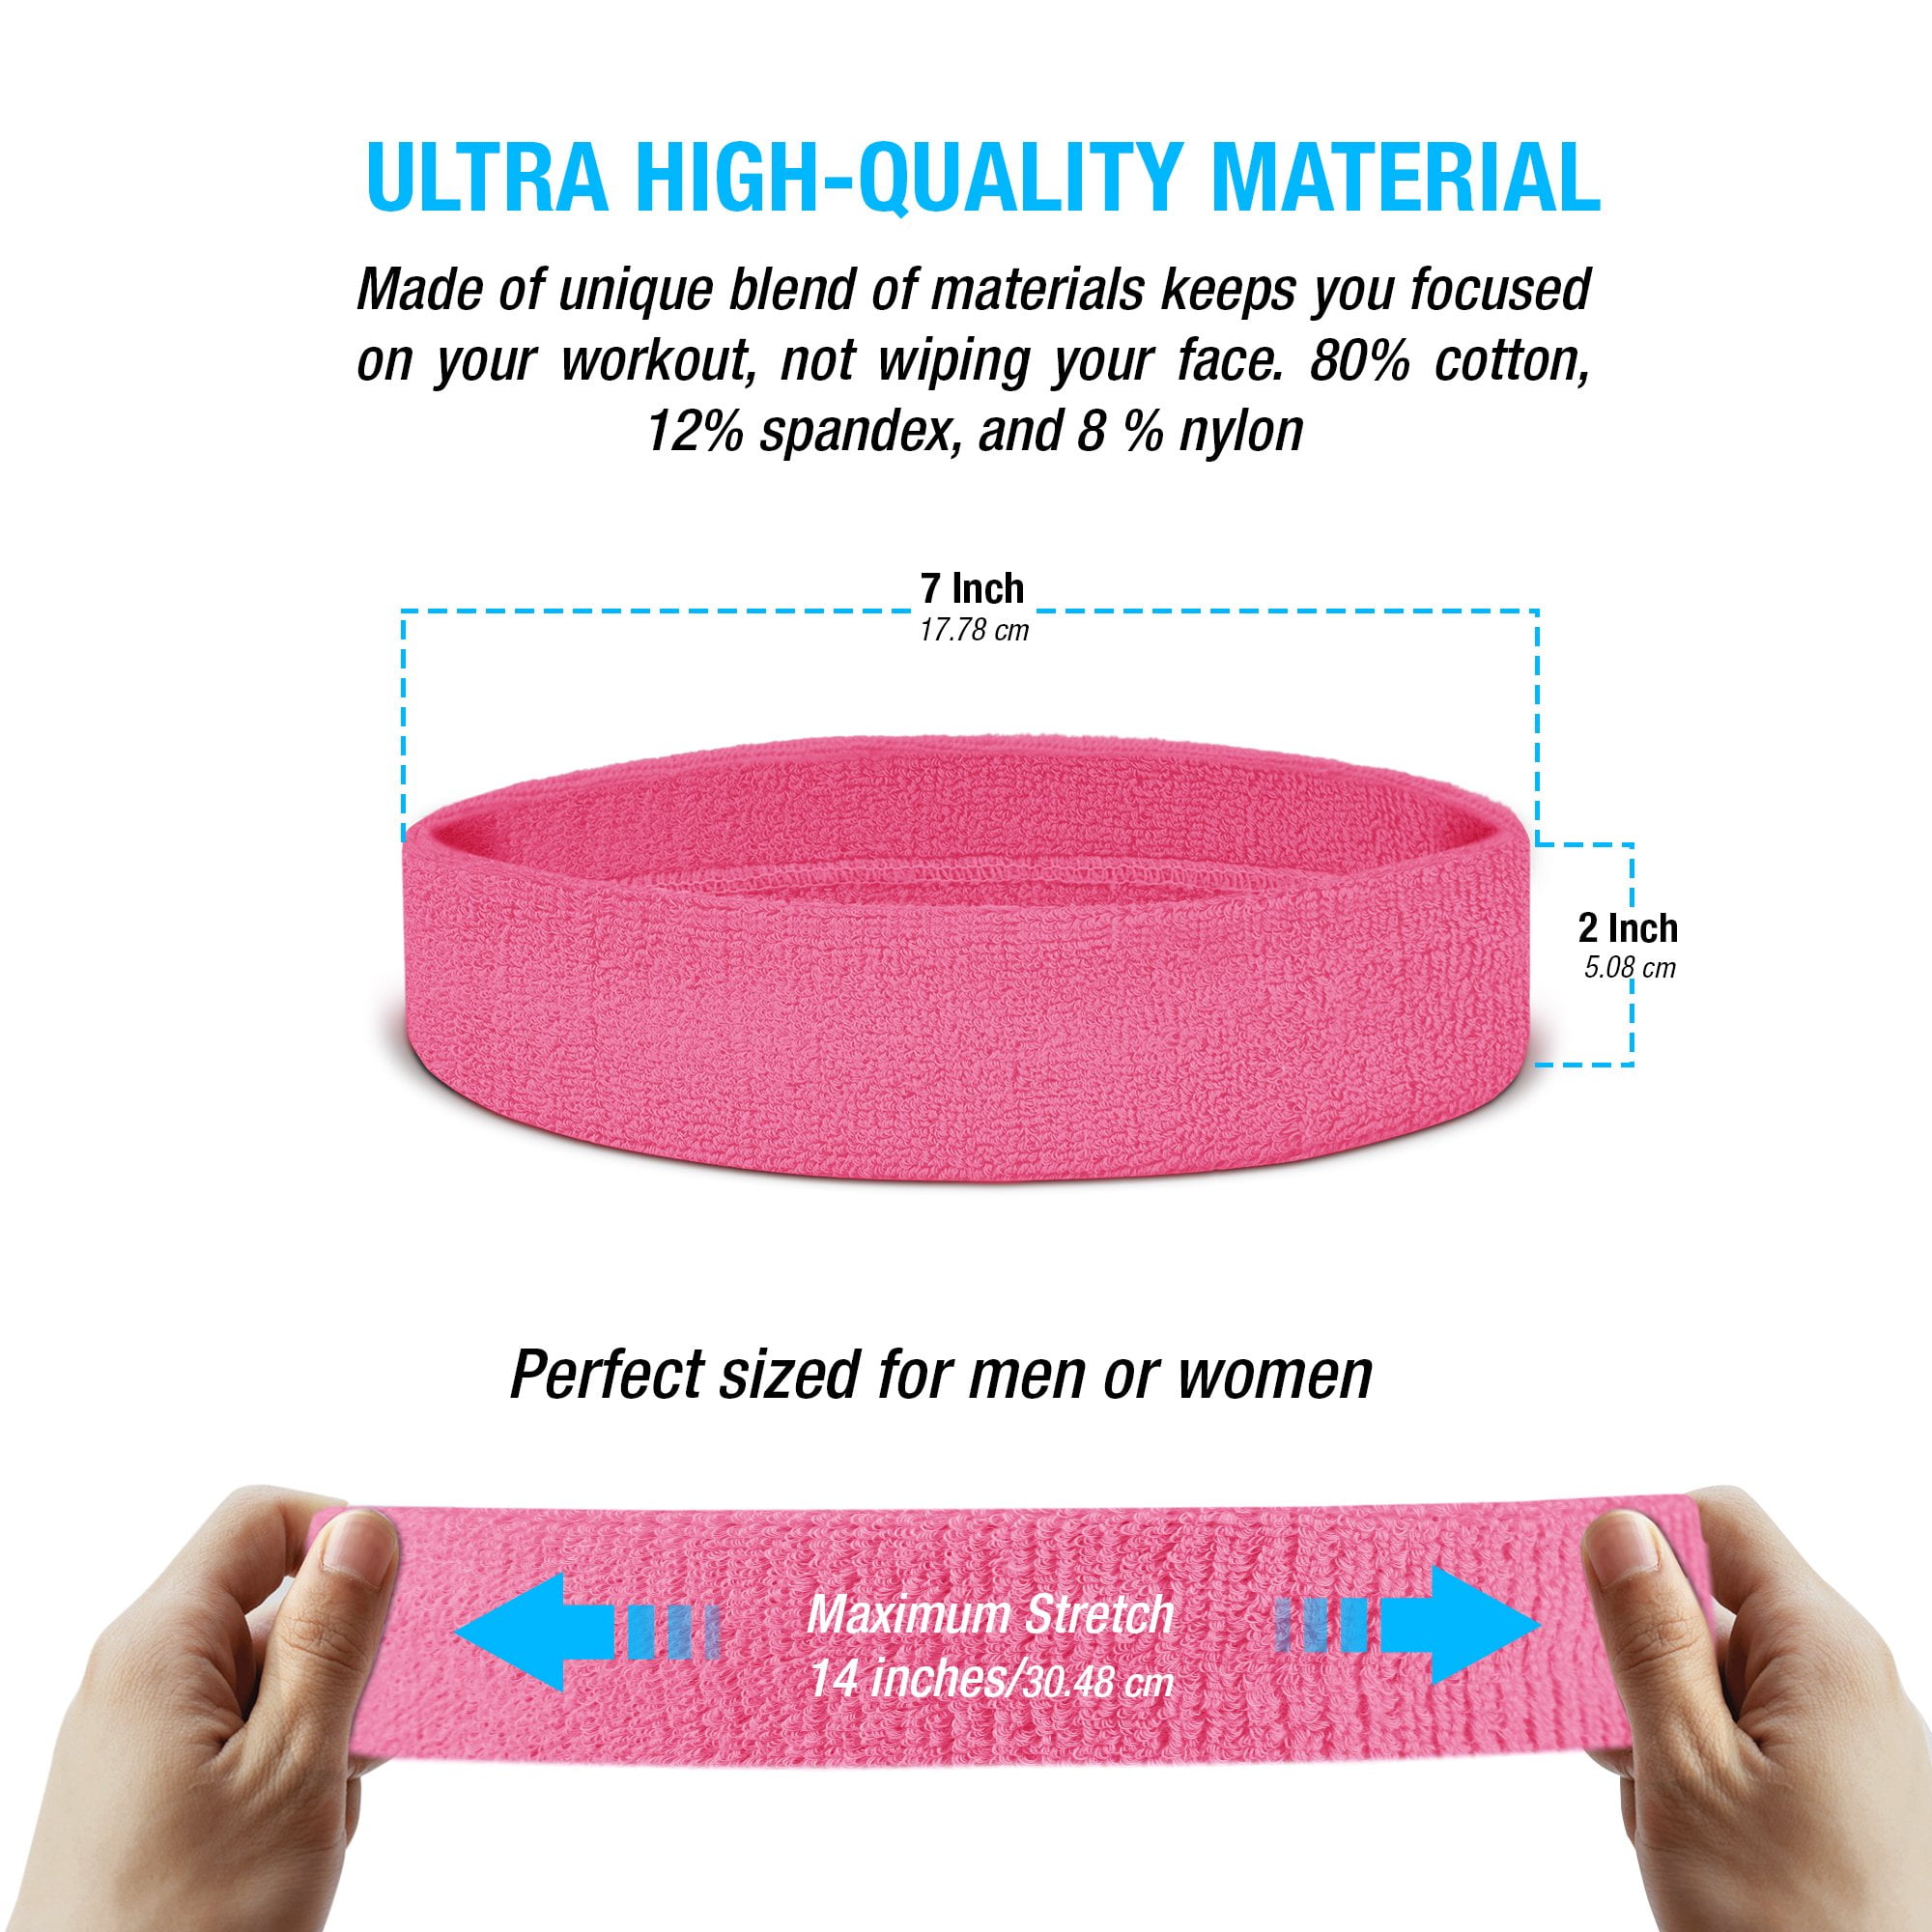 Tennis Moisture Wicking Athletic Cotton Terry Cloth Sweatband for Running,Workout,Basketball Gym TALONITE Sport Headband/Wristband for Men and Women 